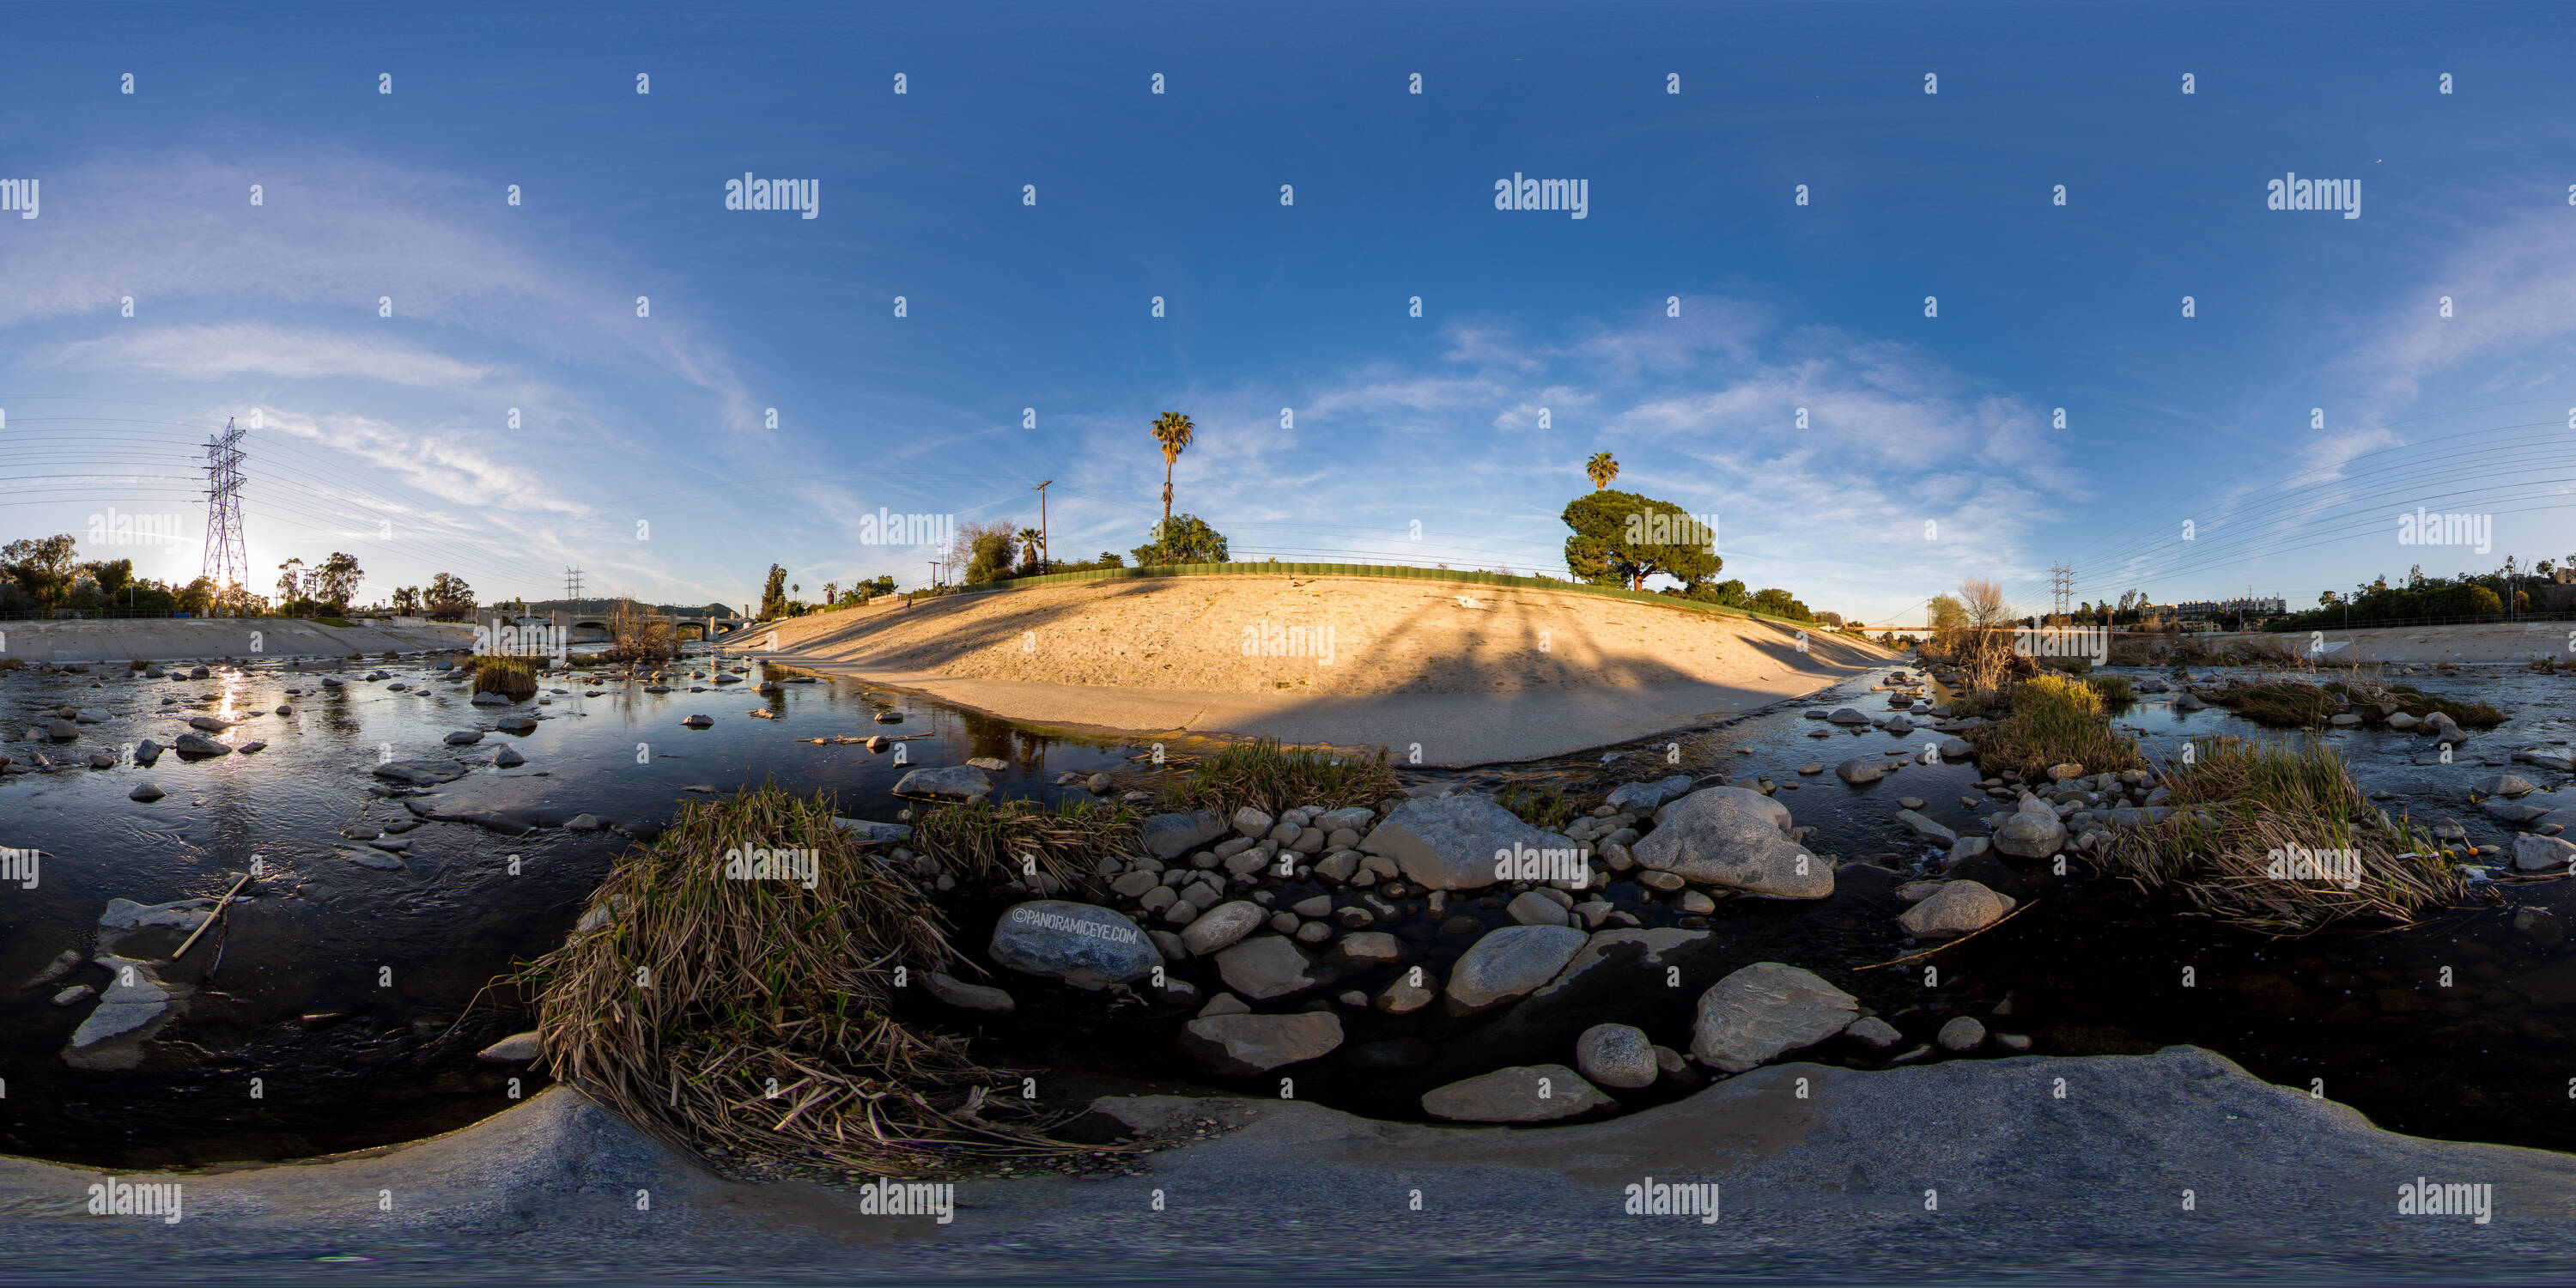 360 degree panoramic view of 360° view of Red Car River Park in Los Angeles, California.